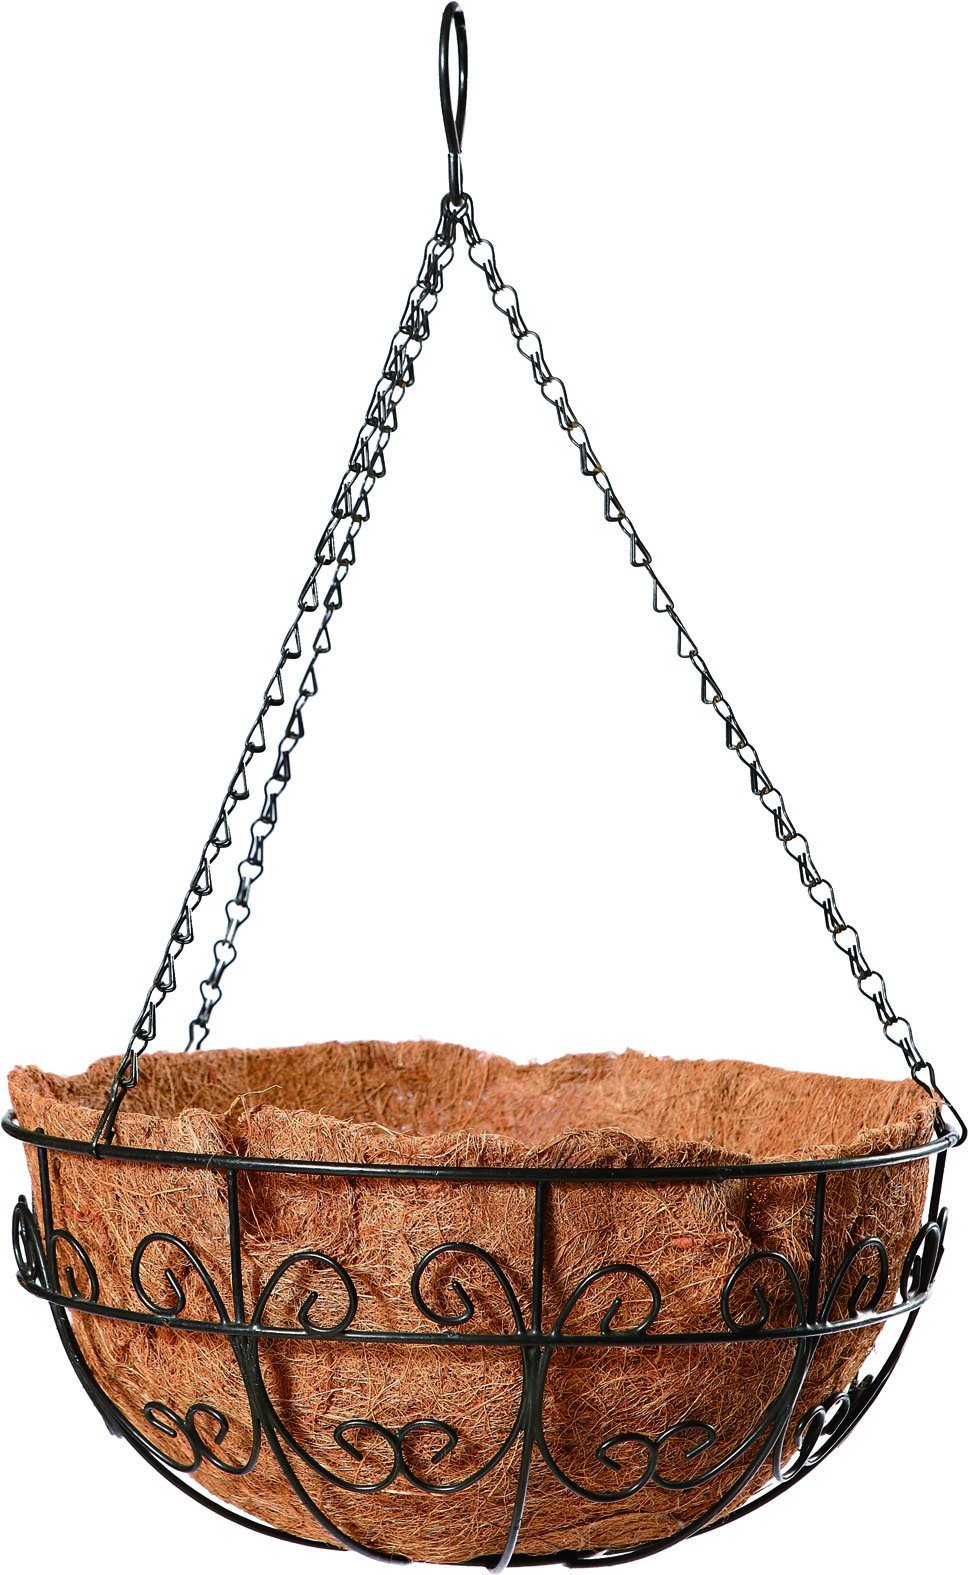 Garden Metal Planter Iron Wire Hanging Basket with Chains and Coco Liner (3 sizes)